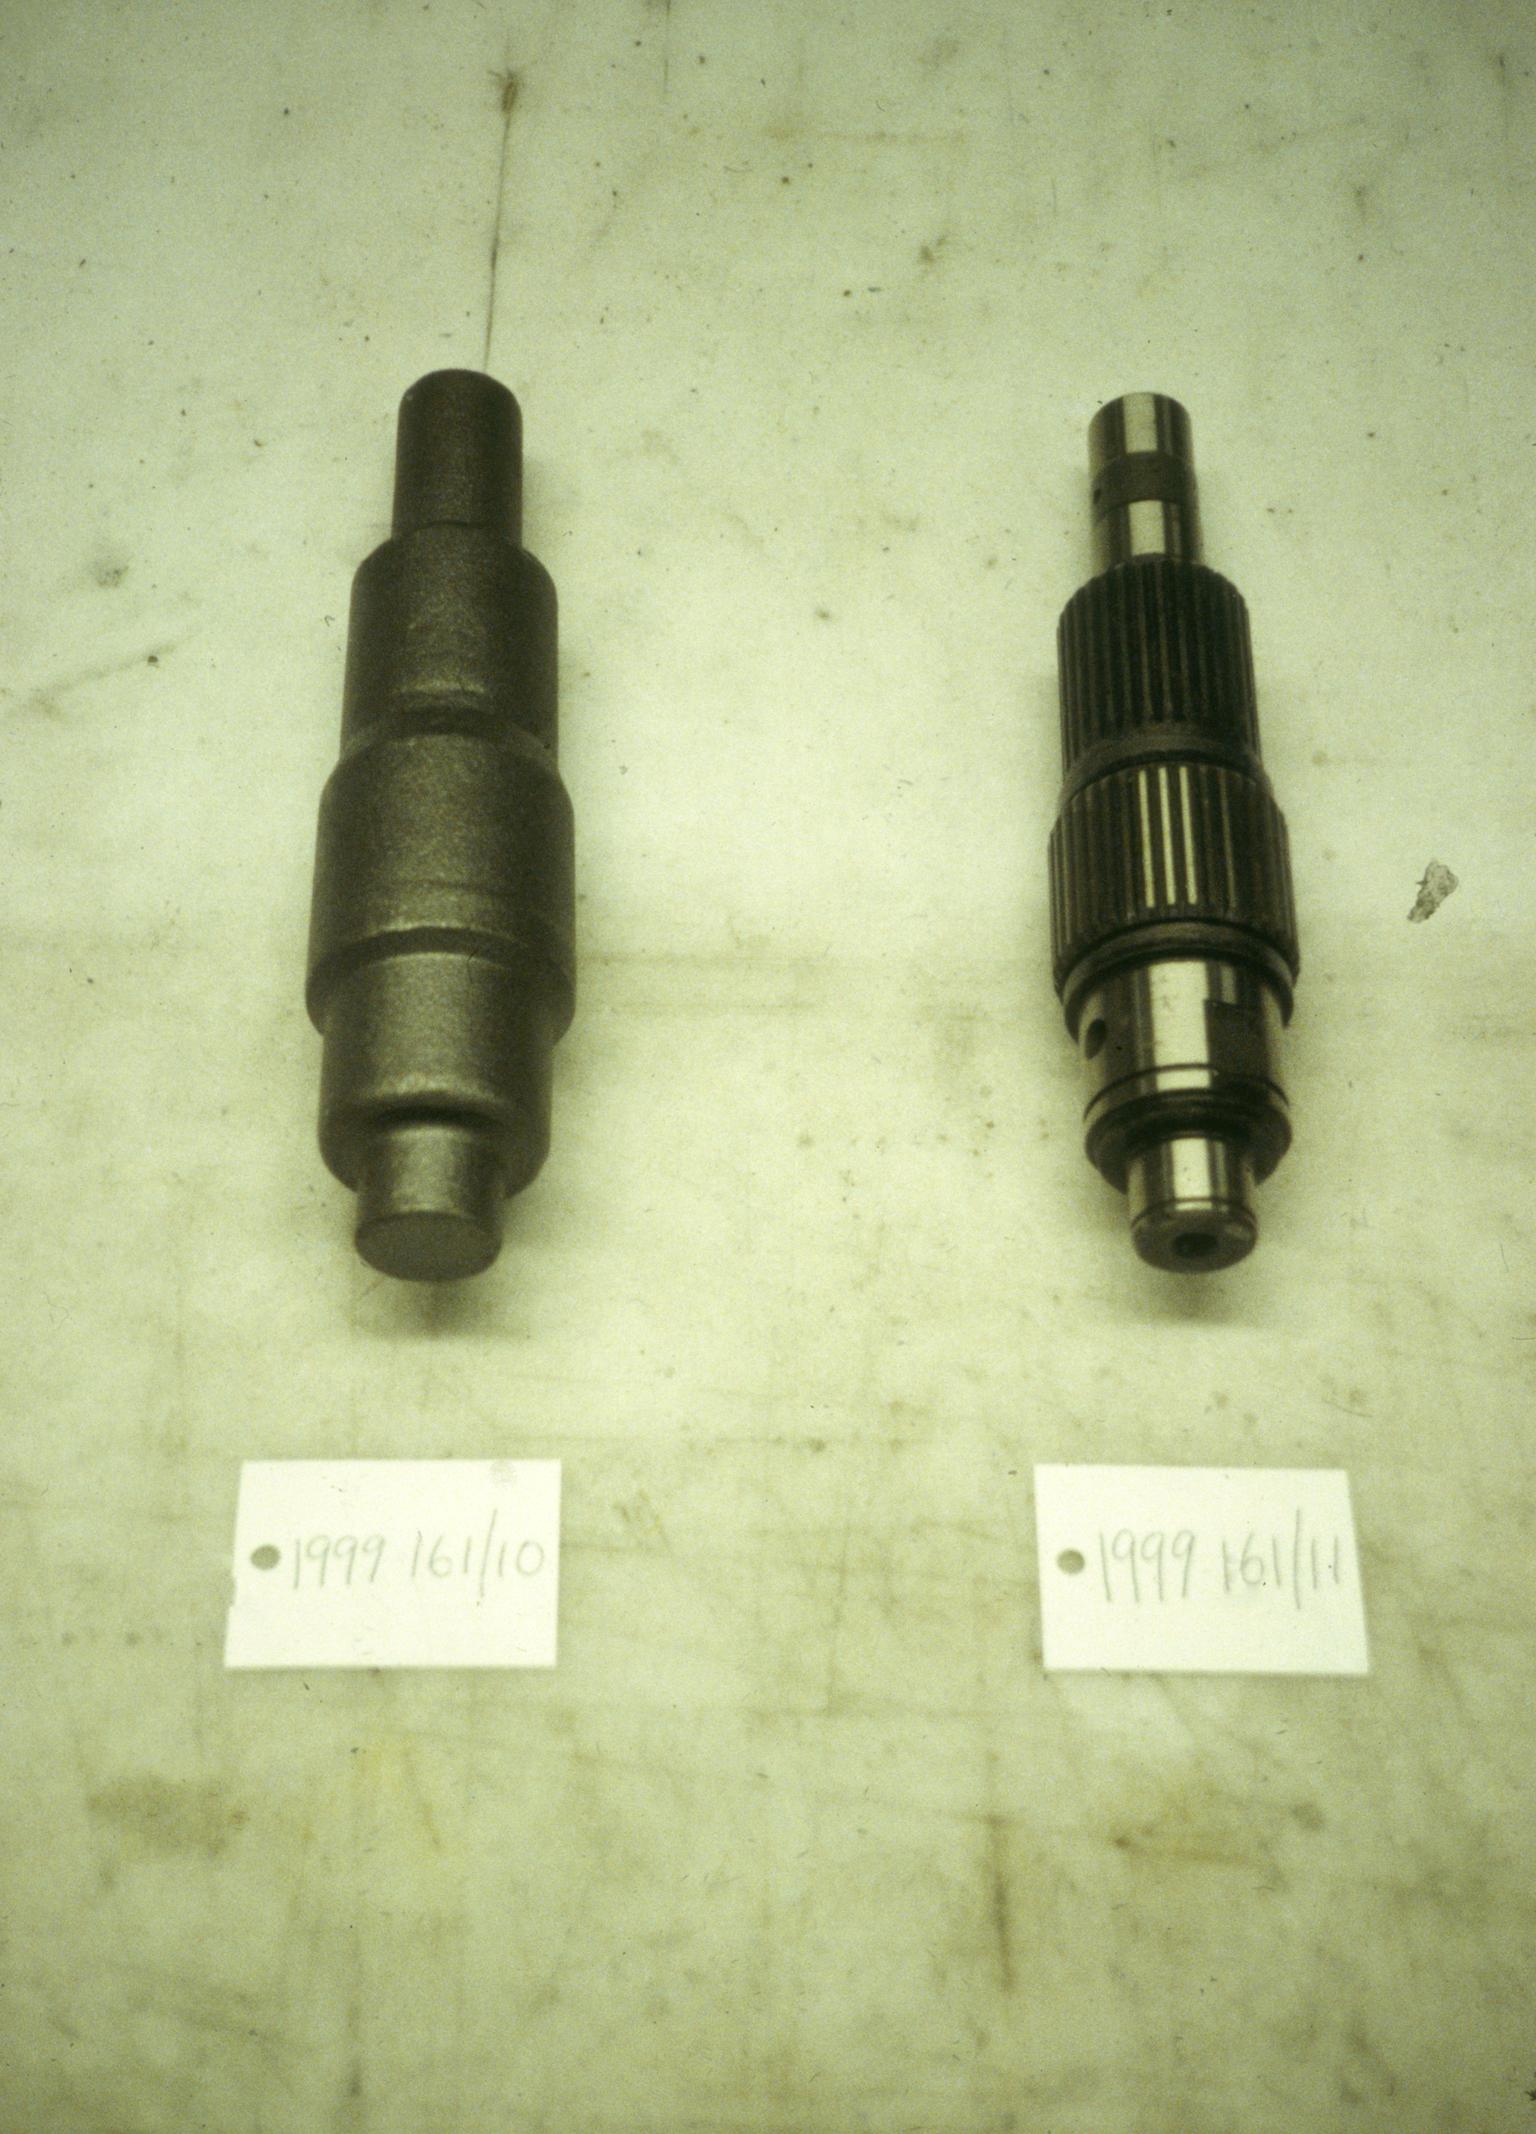 Two unidentified car components